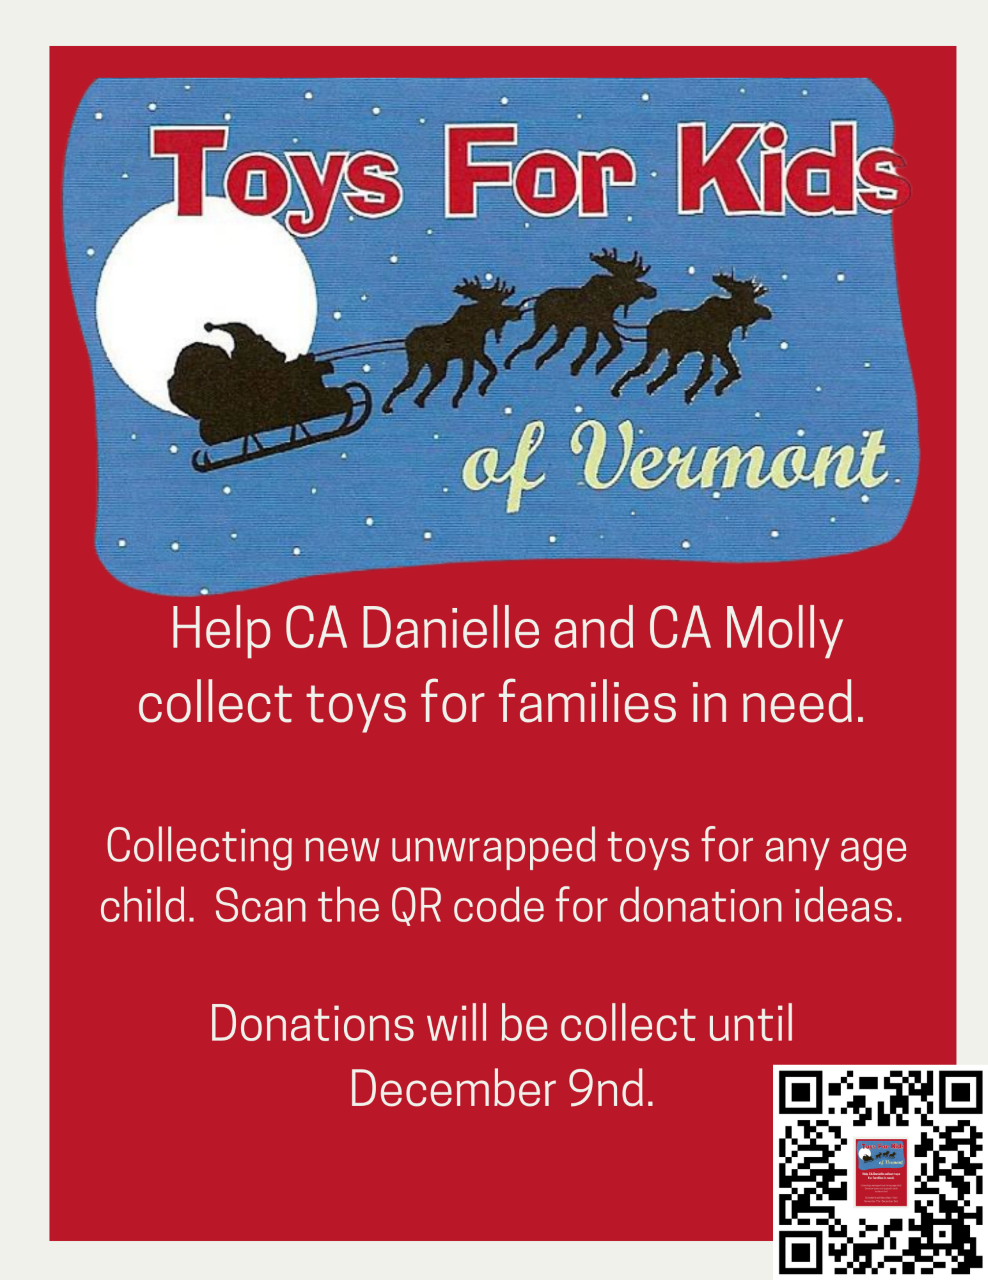 Scan the QR code for ideas of what to donate to Toys for Kids of Vermont!